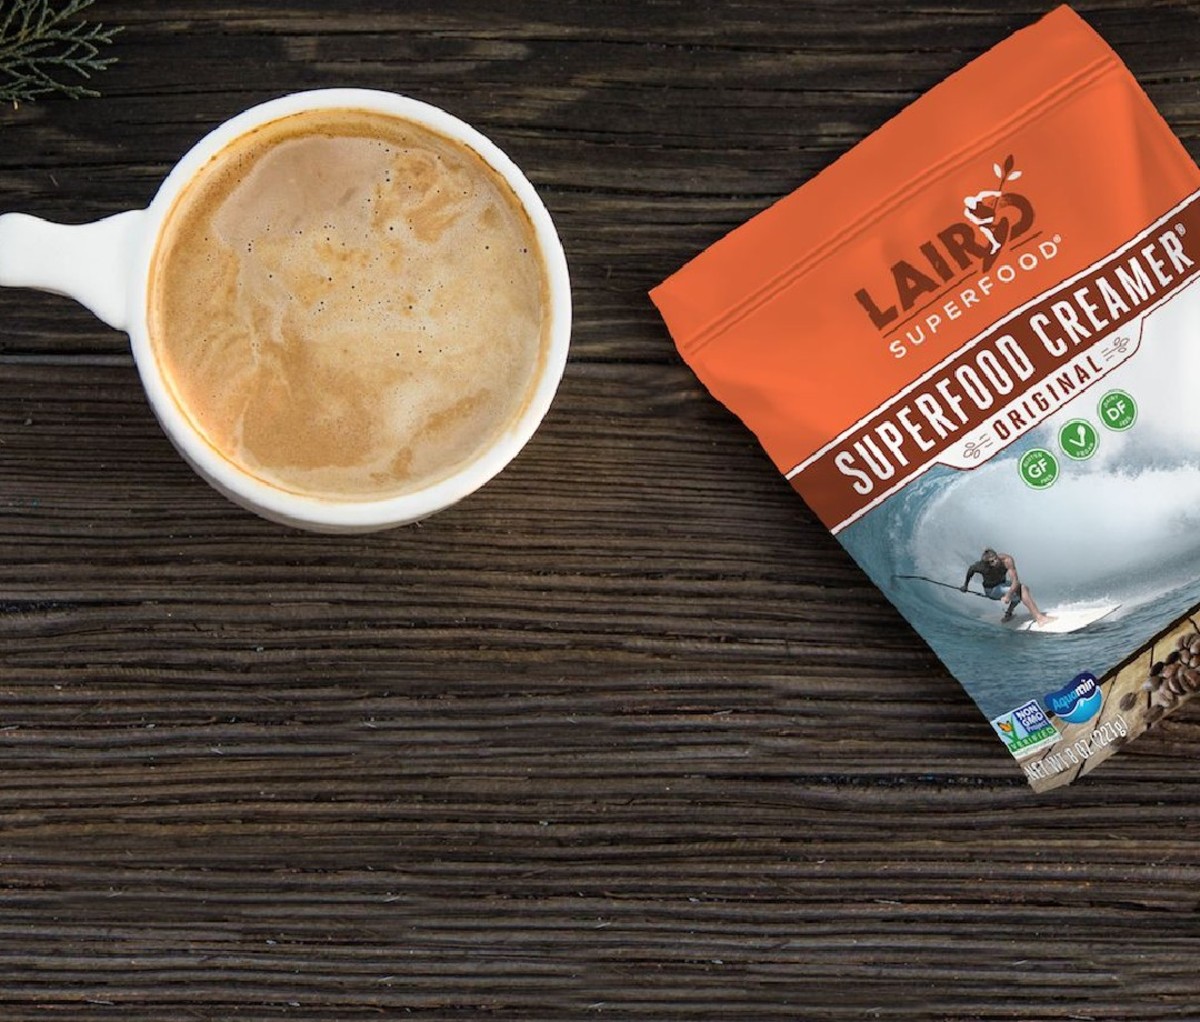 Packet of Laird Superfood Coconut Creamer next to a cup of coffee with the creamer